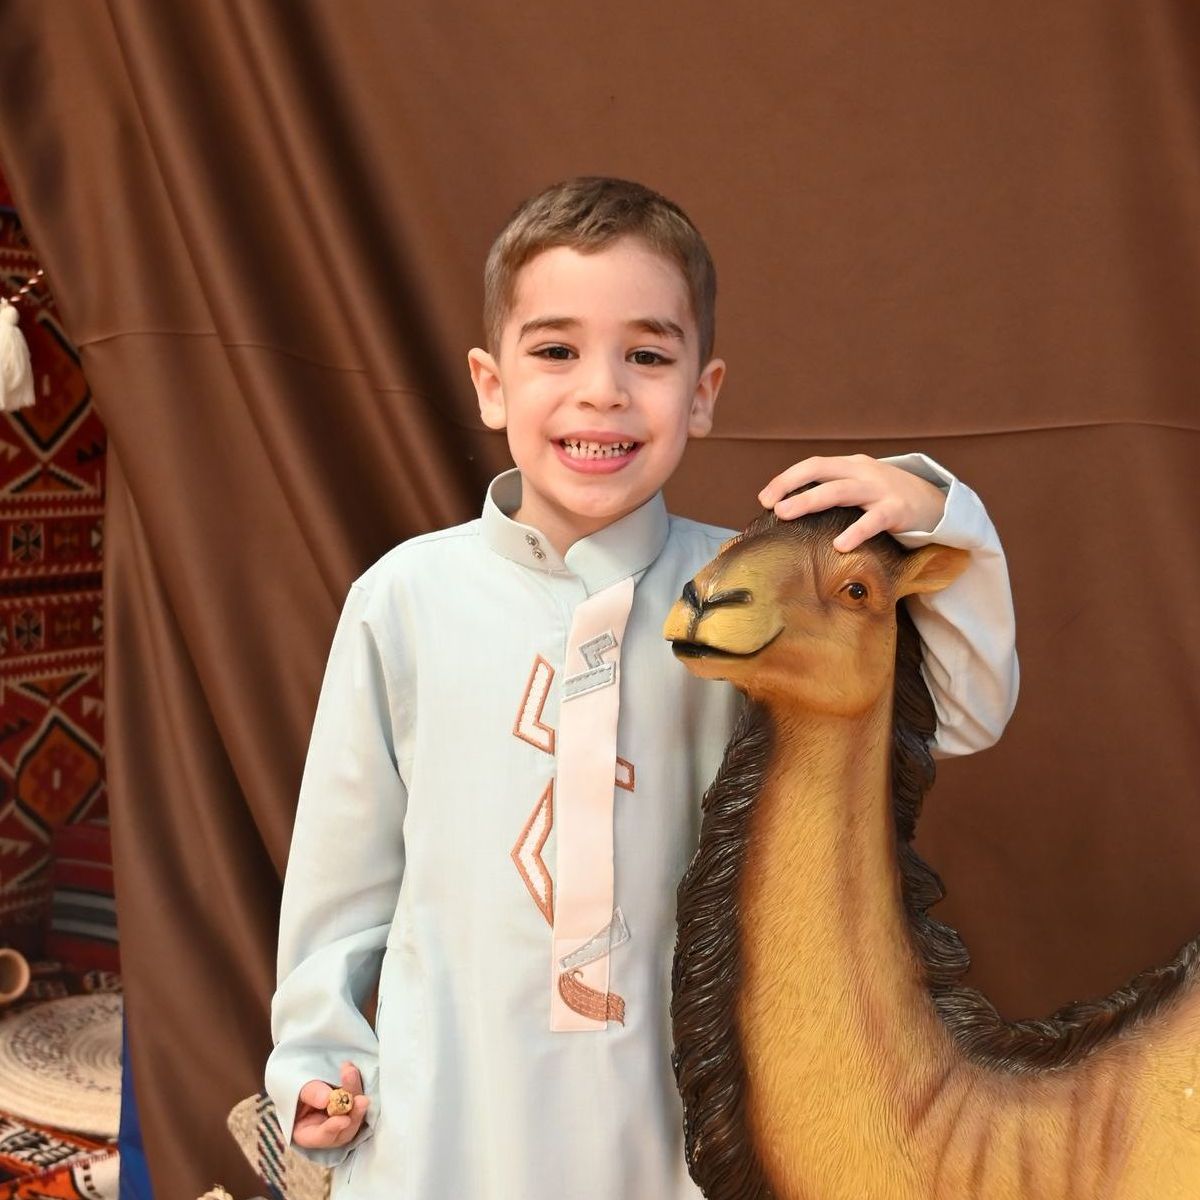 A young boy standing next to a statue of a camel